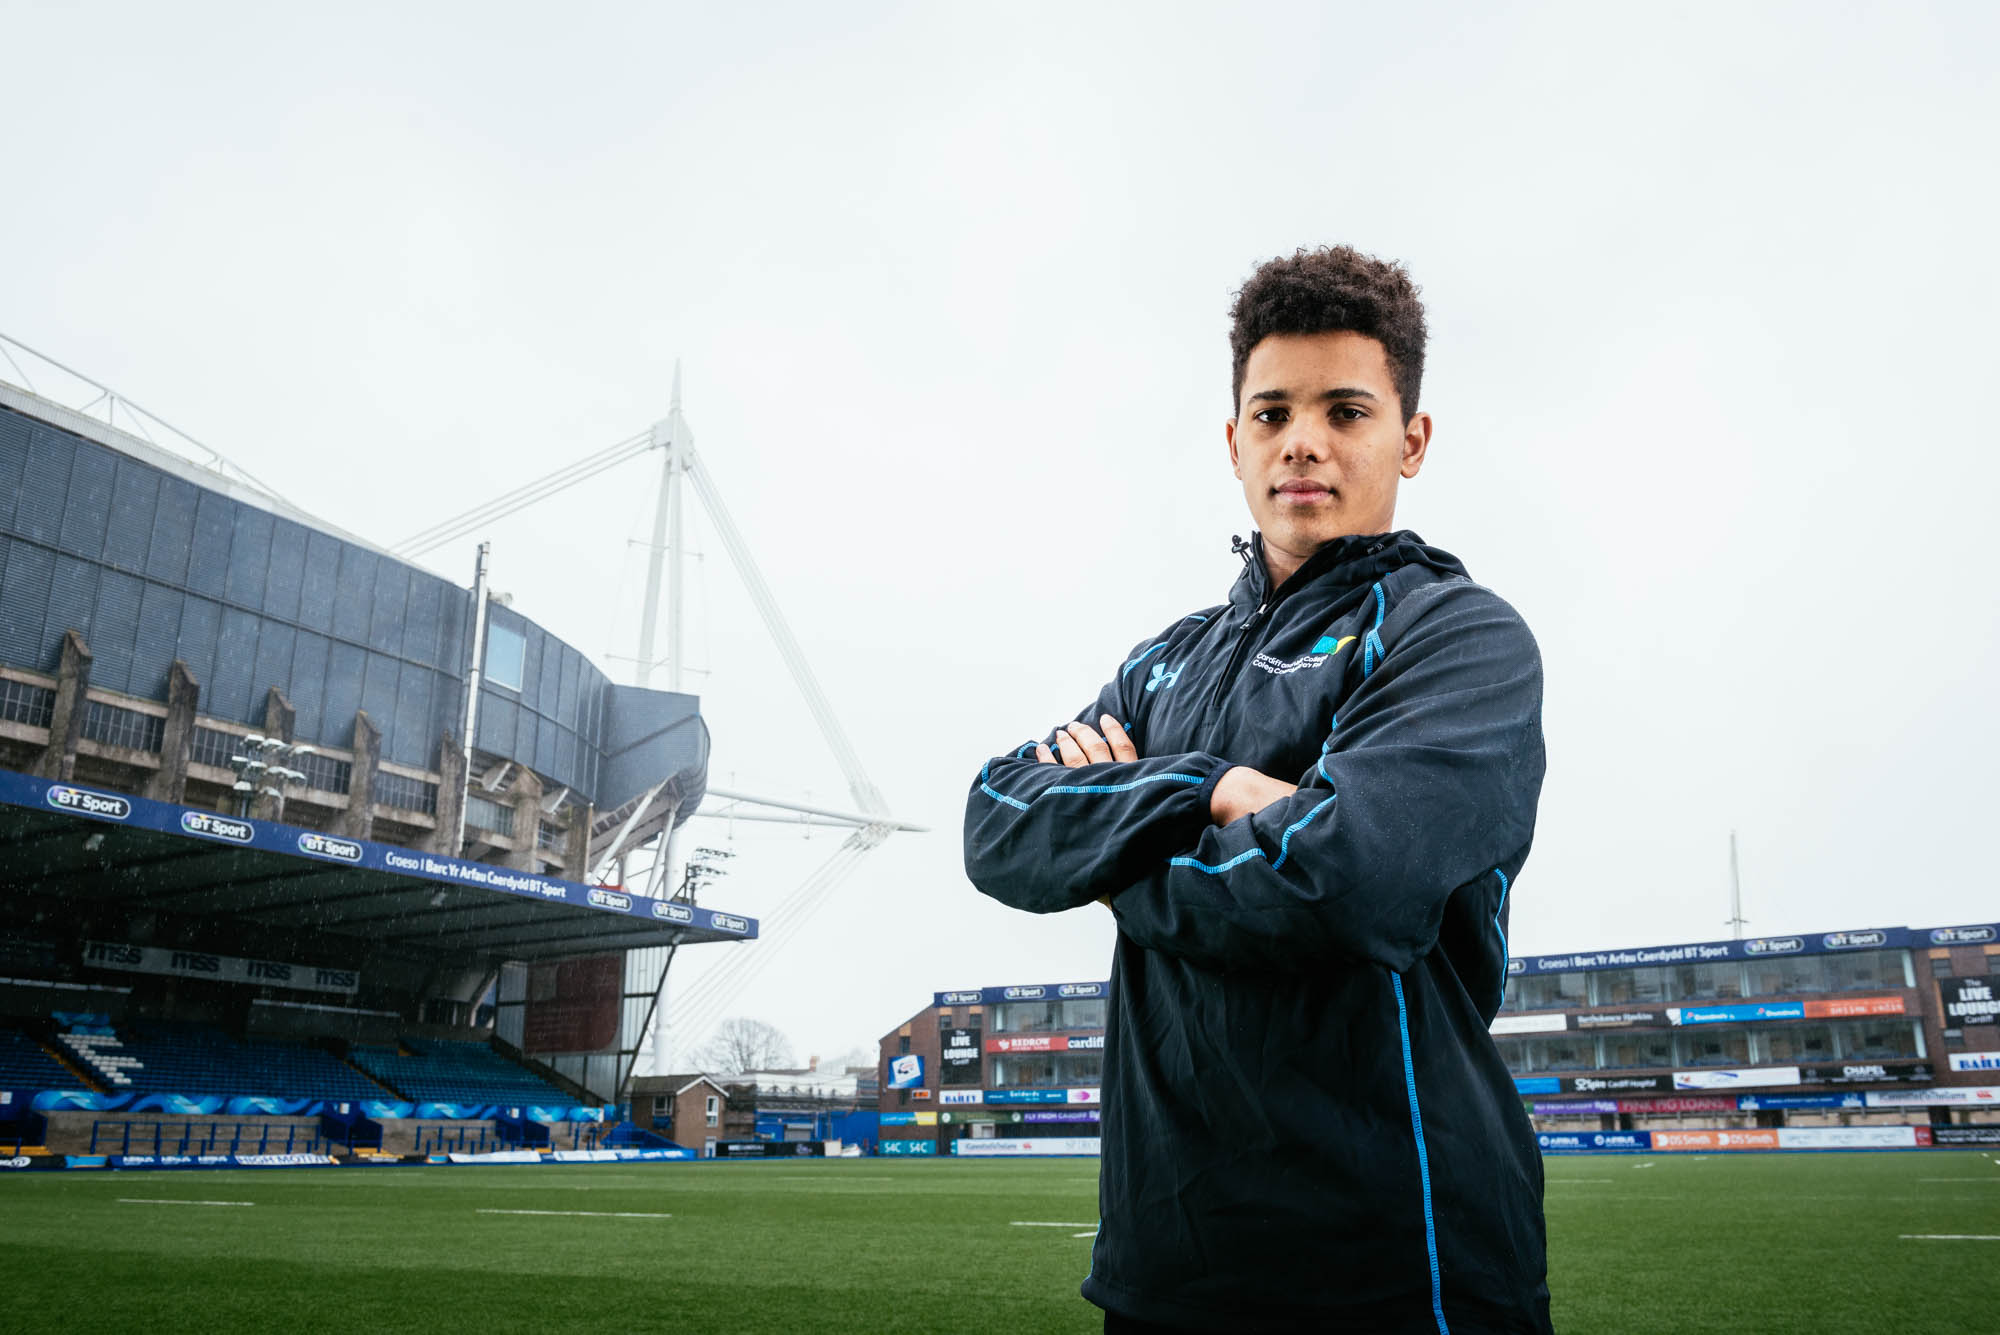 A photo of a rugby player at the arms park in cardiff with the millennium stadium behind